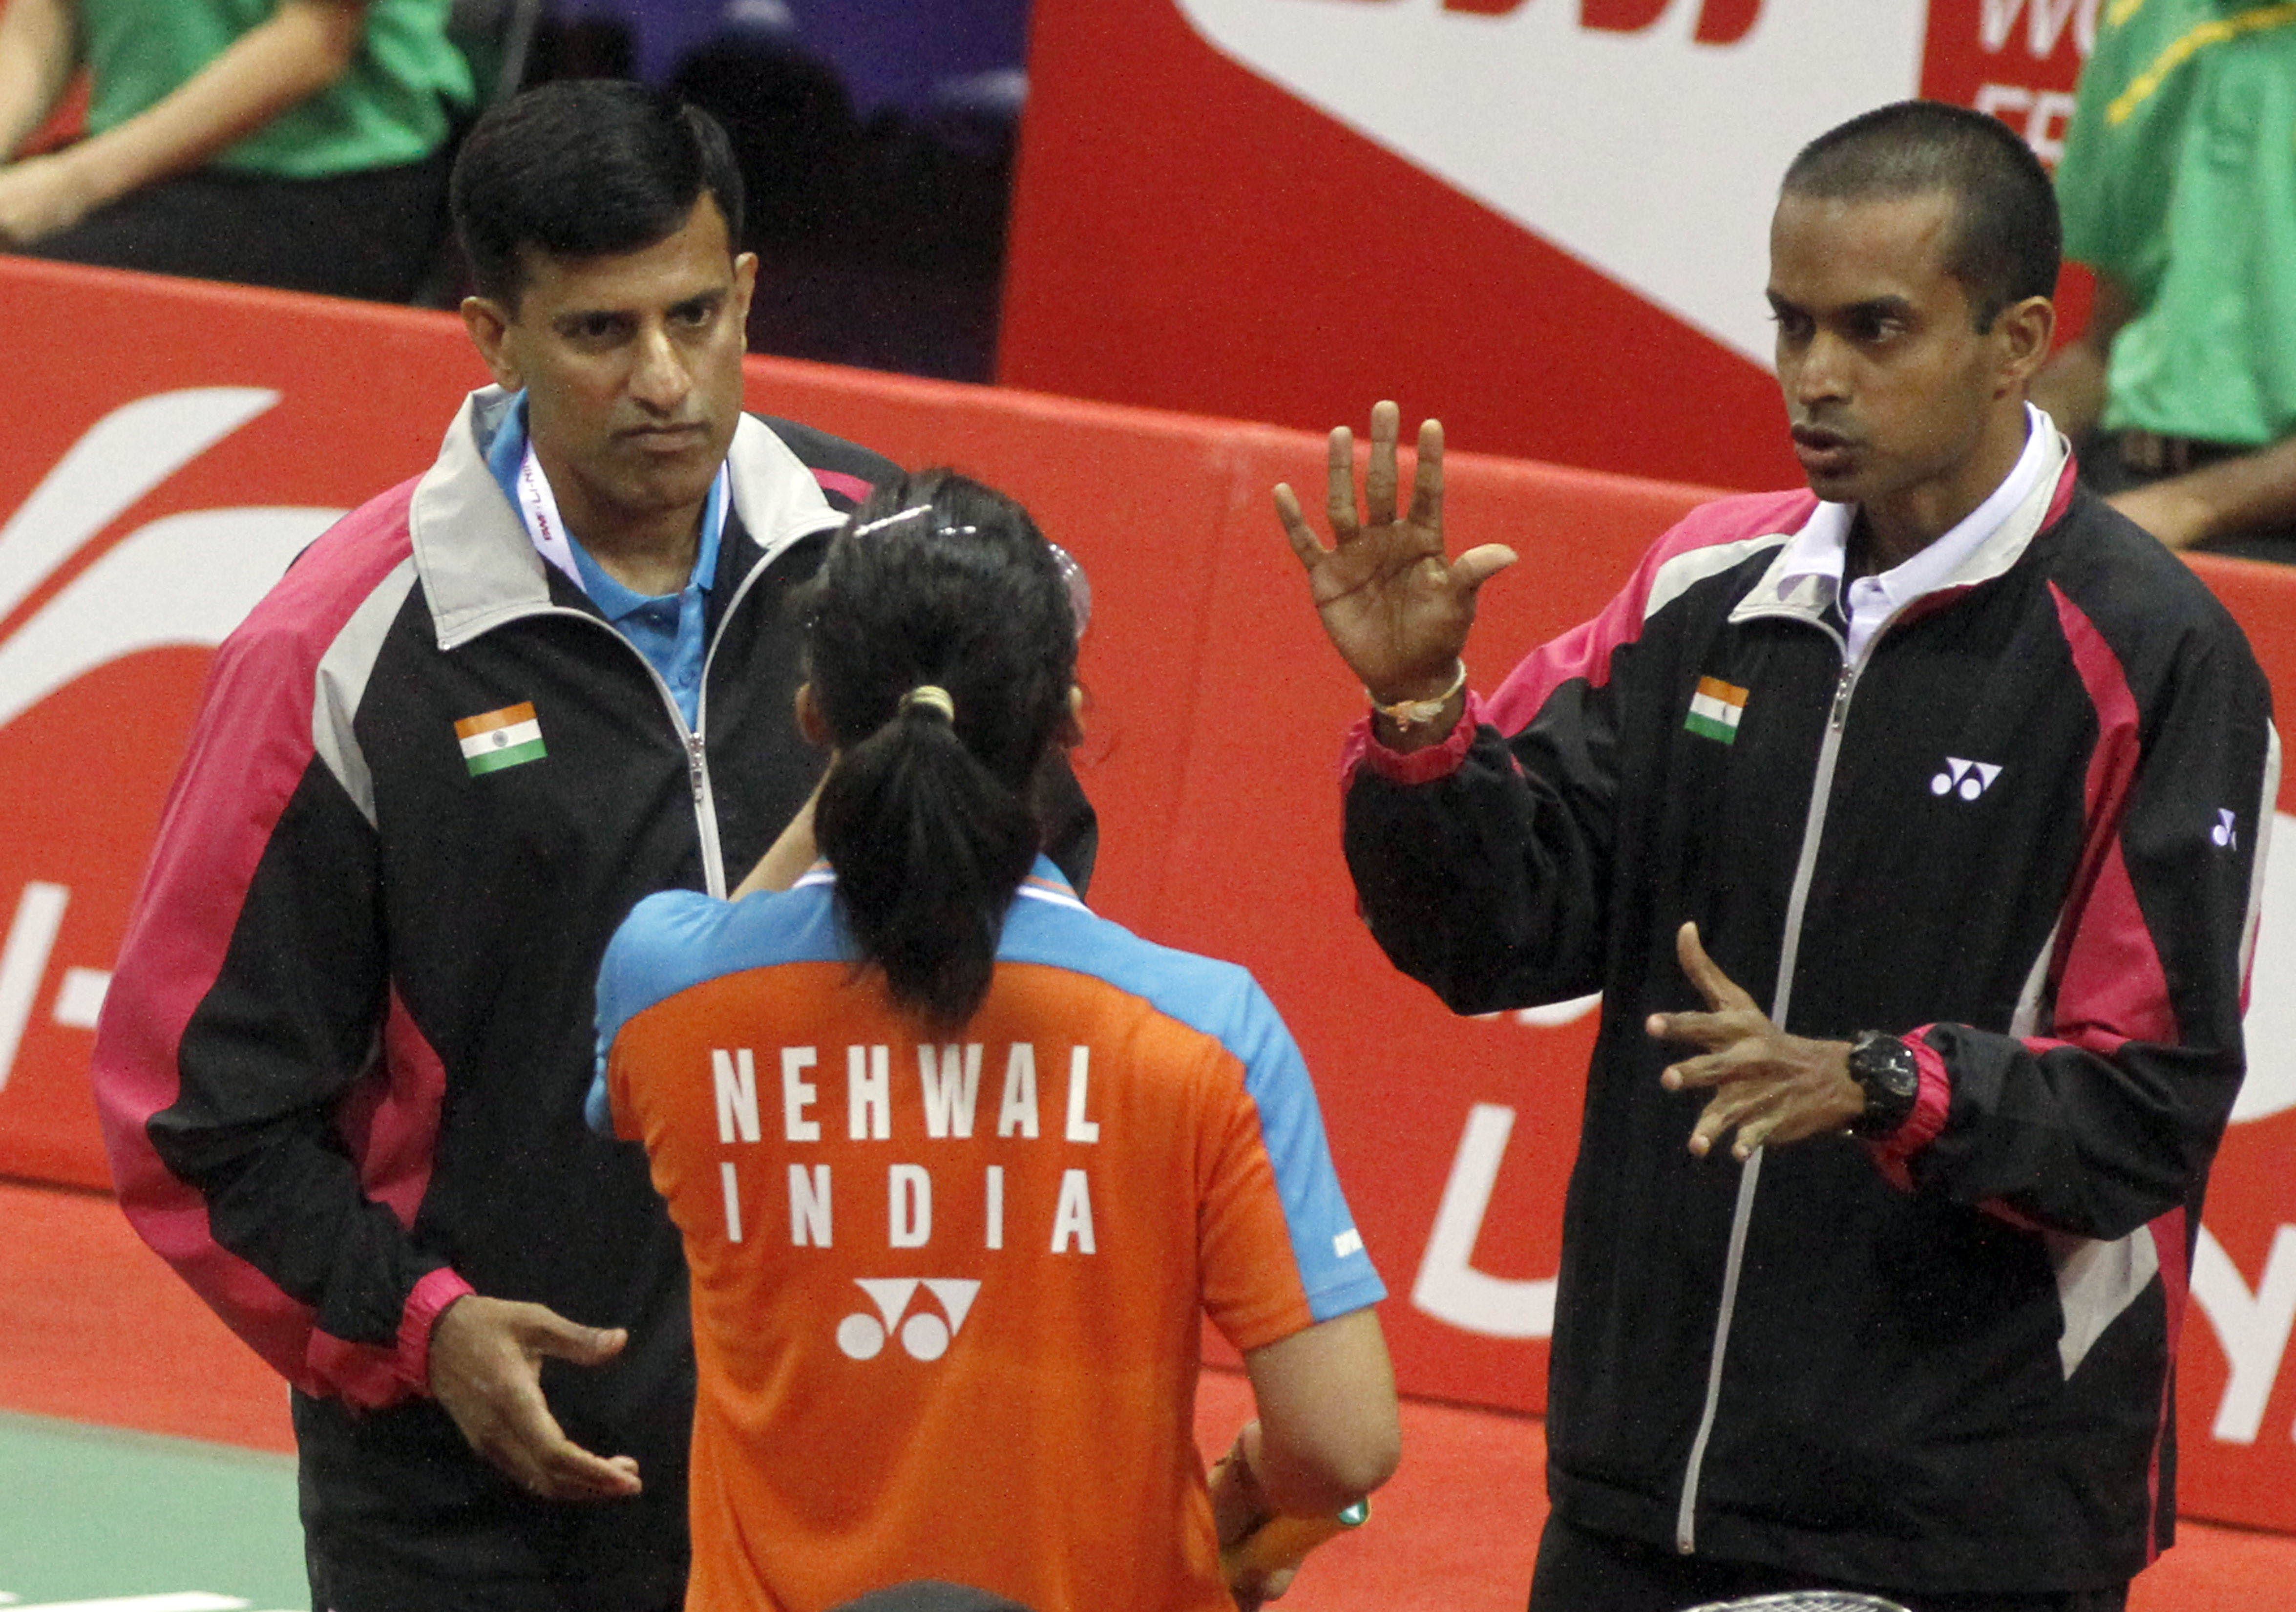 If Saina manages her work load, she can deliver a lot under Gopichand, says Vimal Kumar